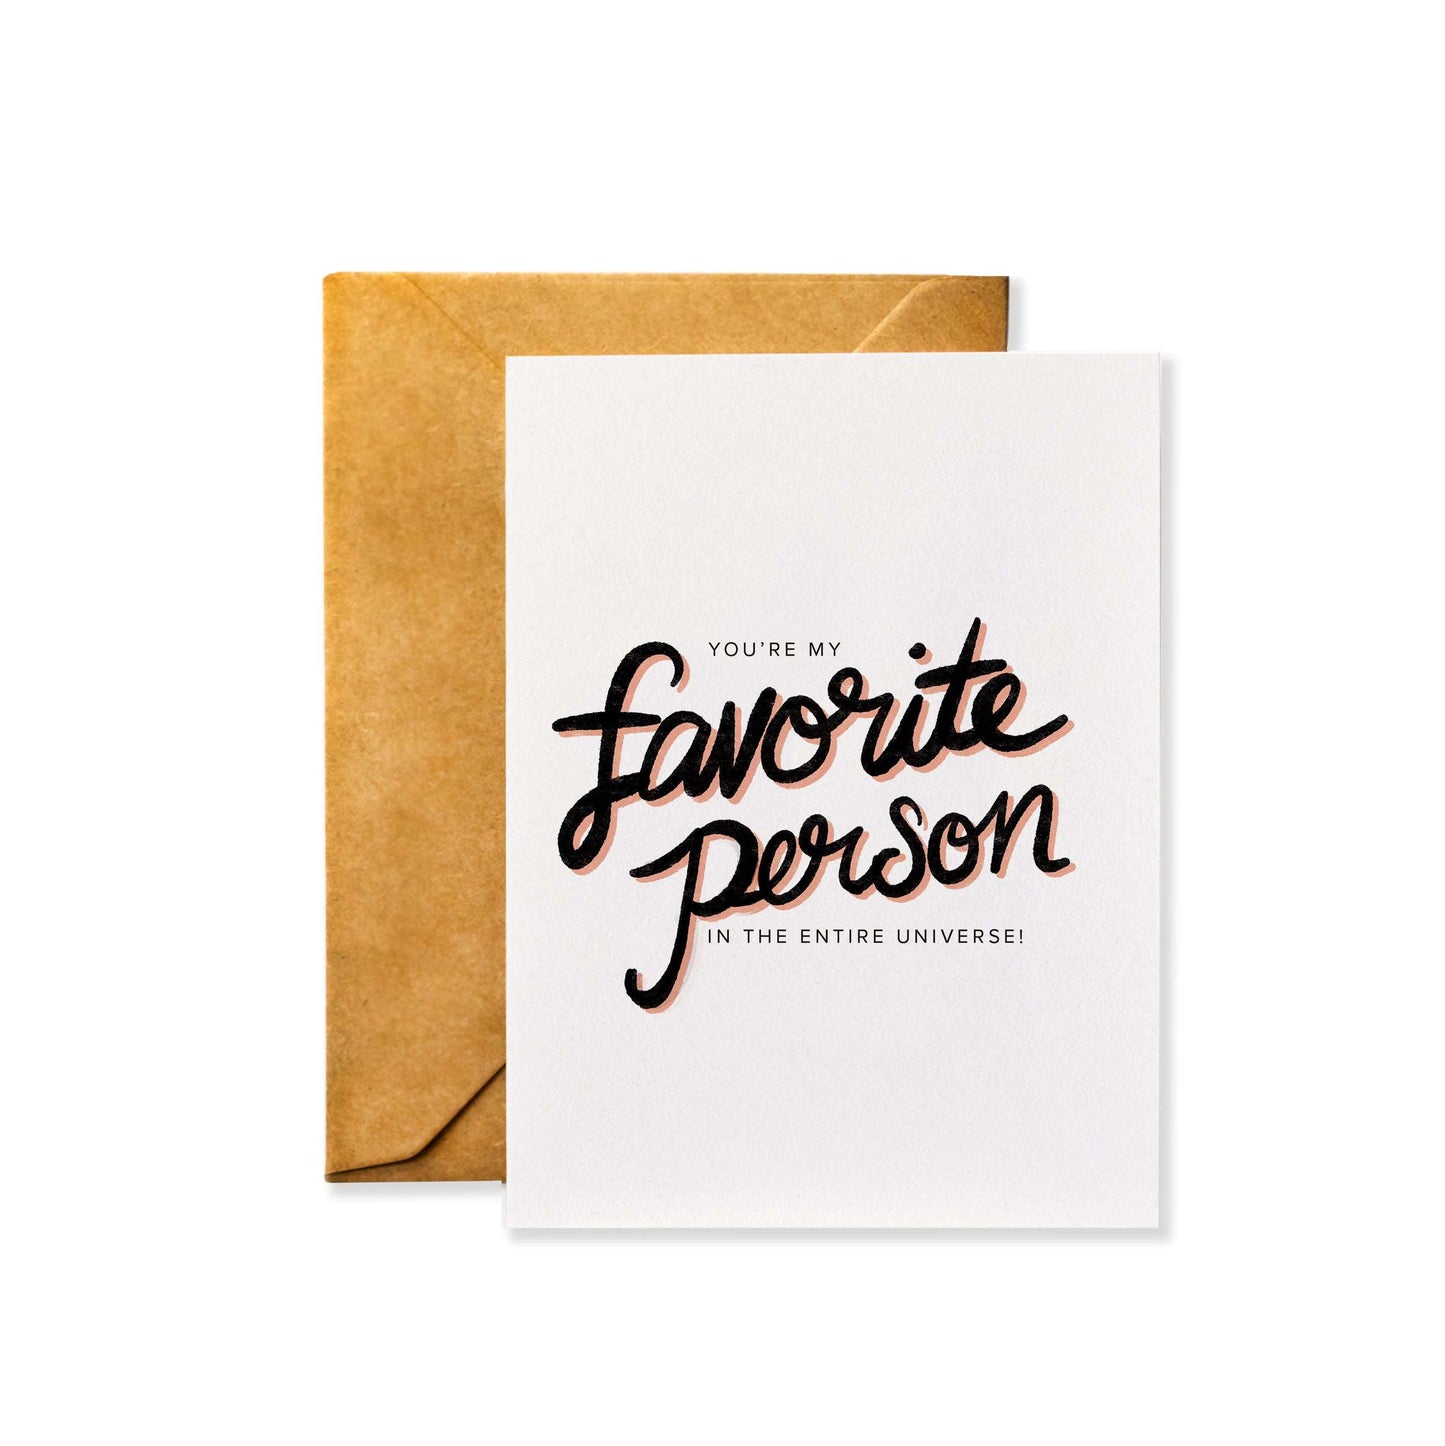 You're My Favorite Person in the Entire Universe Anniversary Card, Friendship Card, Bestfriends Gifts for Her